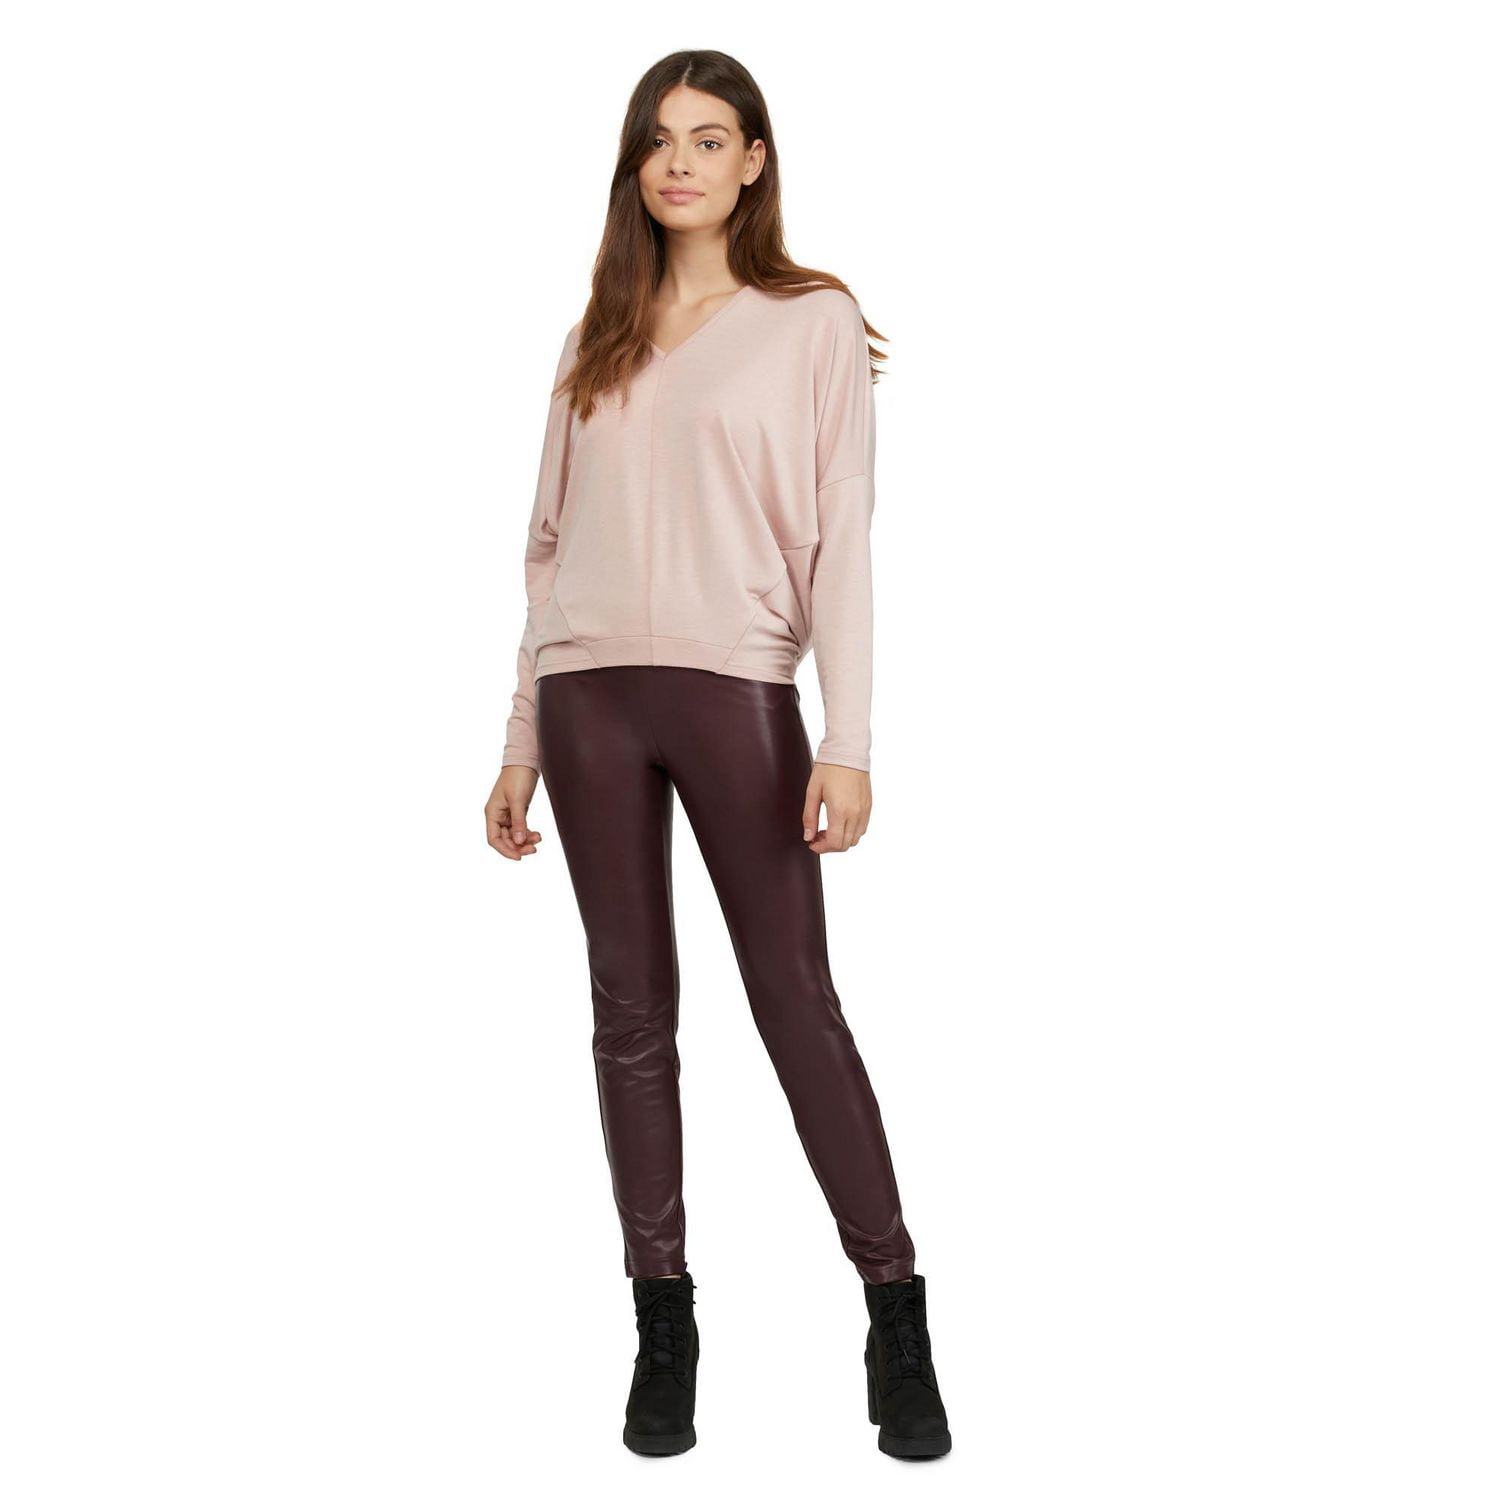 Comfy beige top over burgundy leather pants.  Outfits with leggings,  Leather leggings outfit, Leggings outfit fall